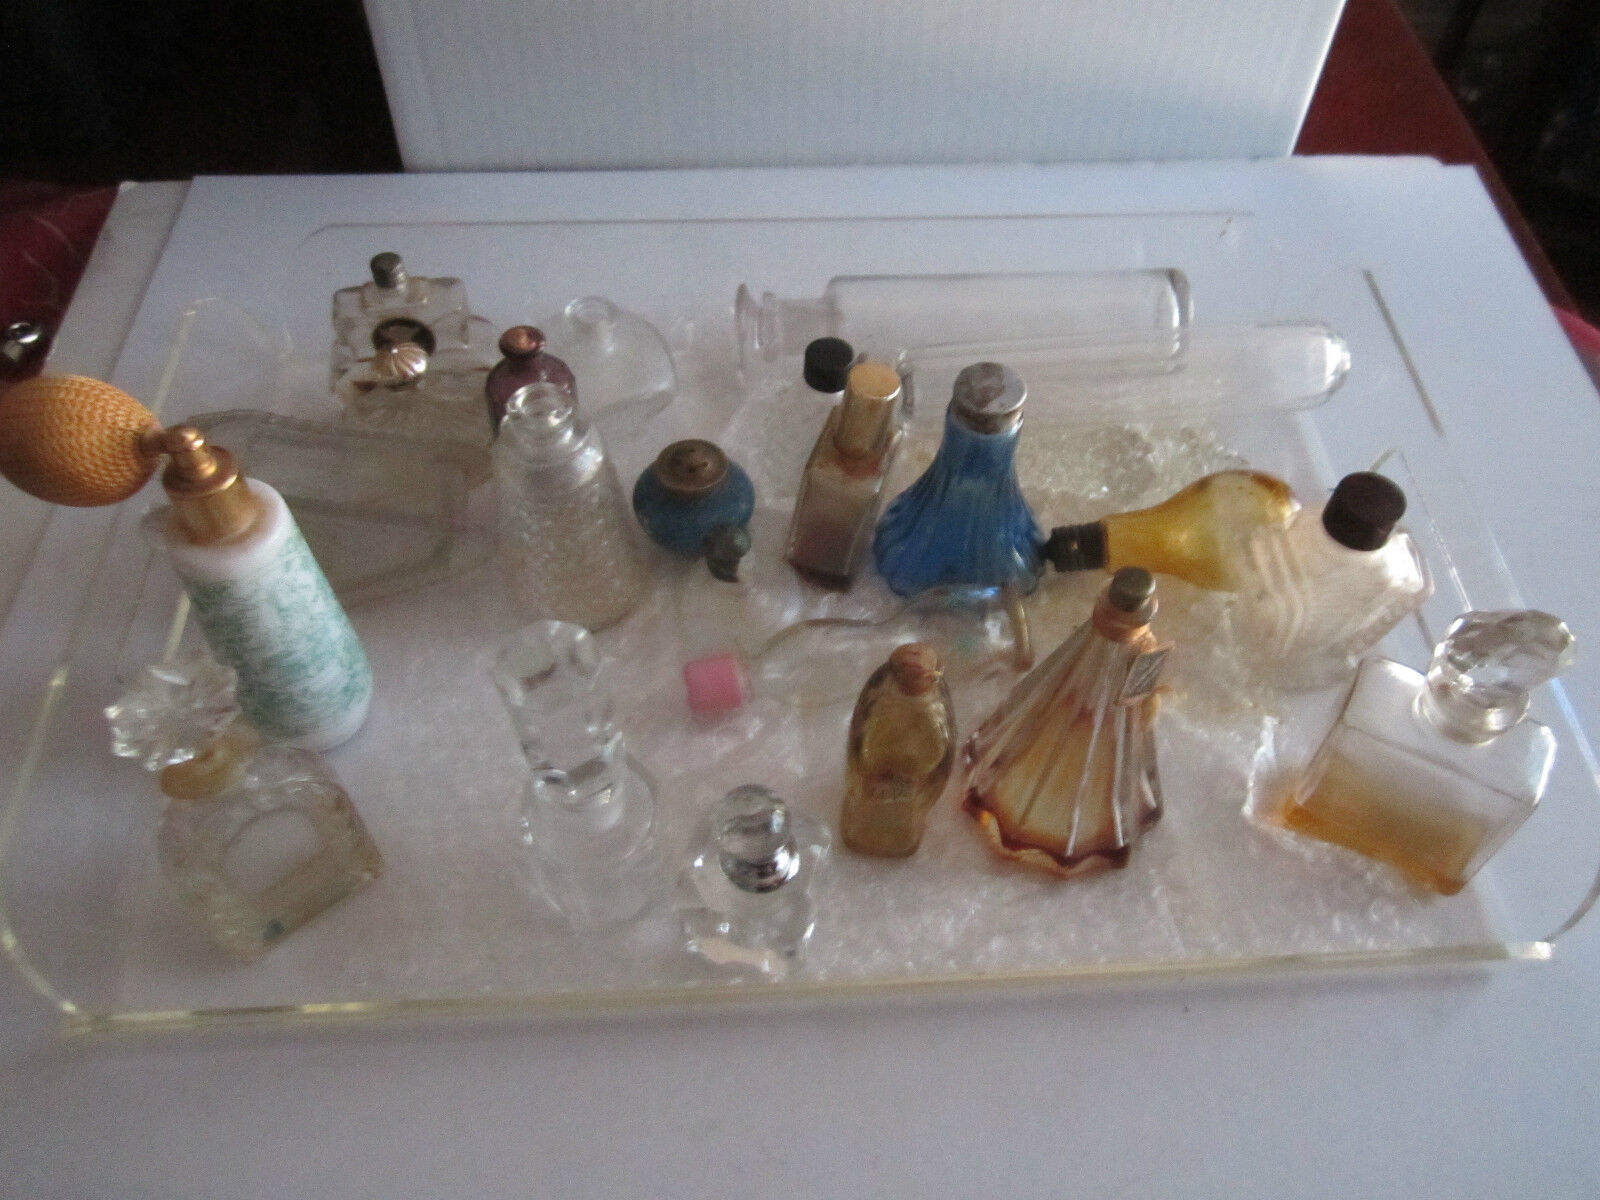 23 VTG PERFUME BOTTLES AND DECANTERS & MORE - SEE PICS -  